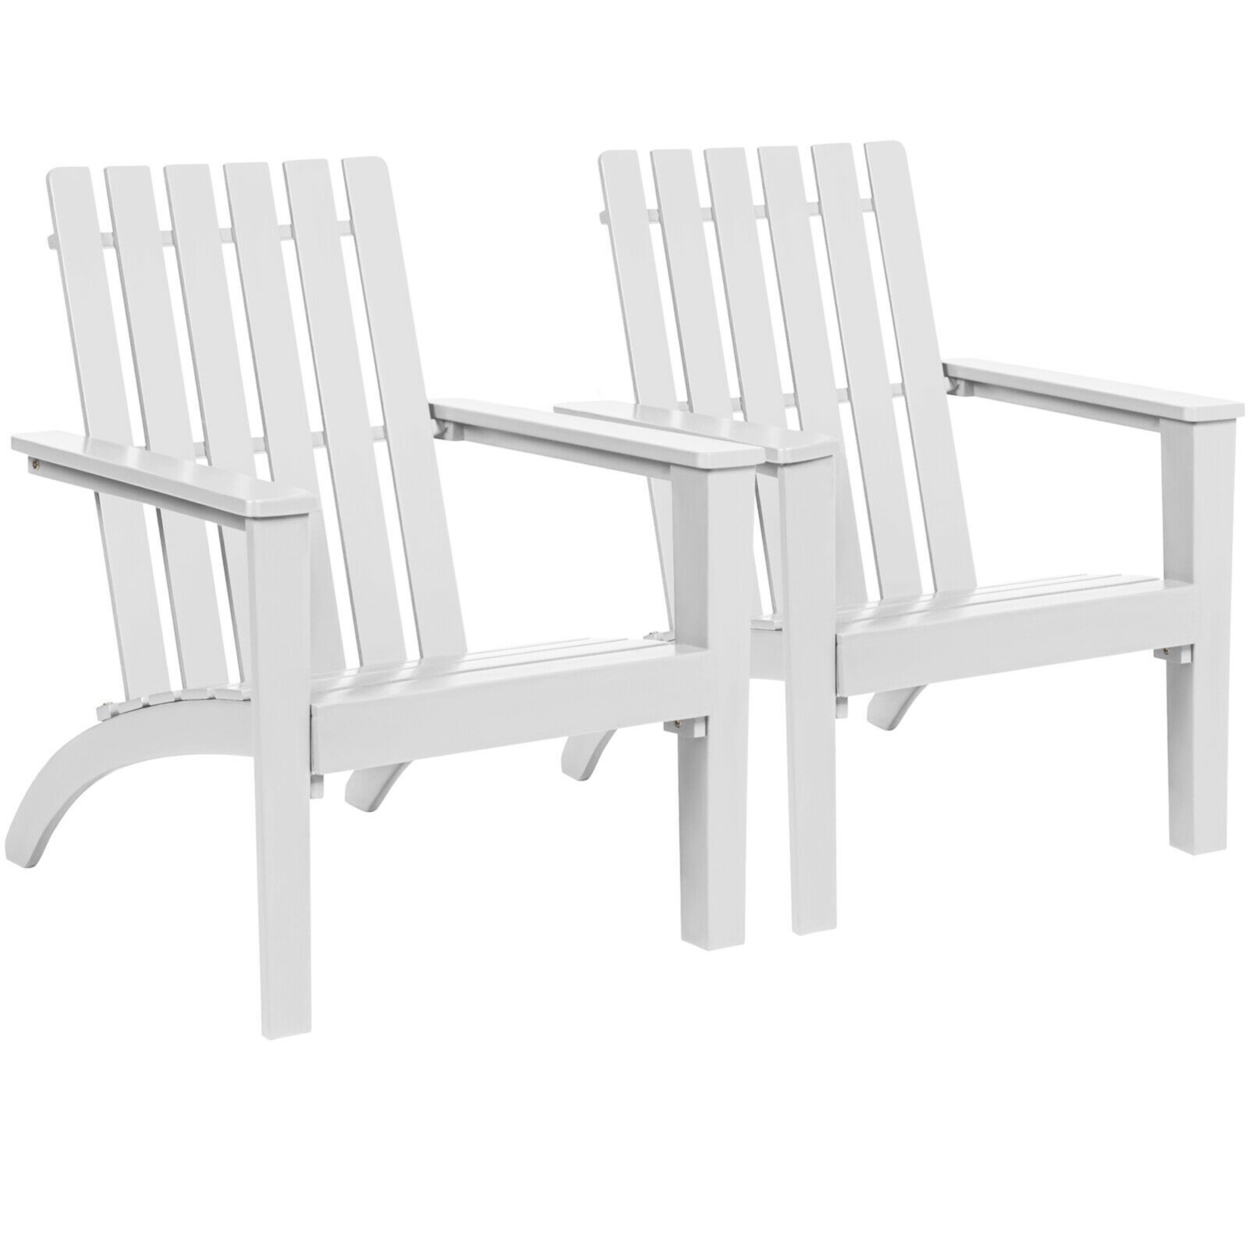 Set Of 2 Outdoor Wooden Adirondack Chair Patio Lounge Chair W/ Armrest - White